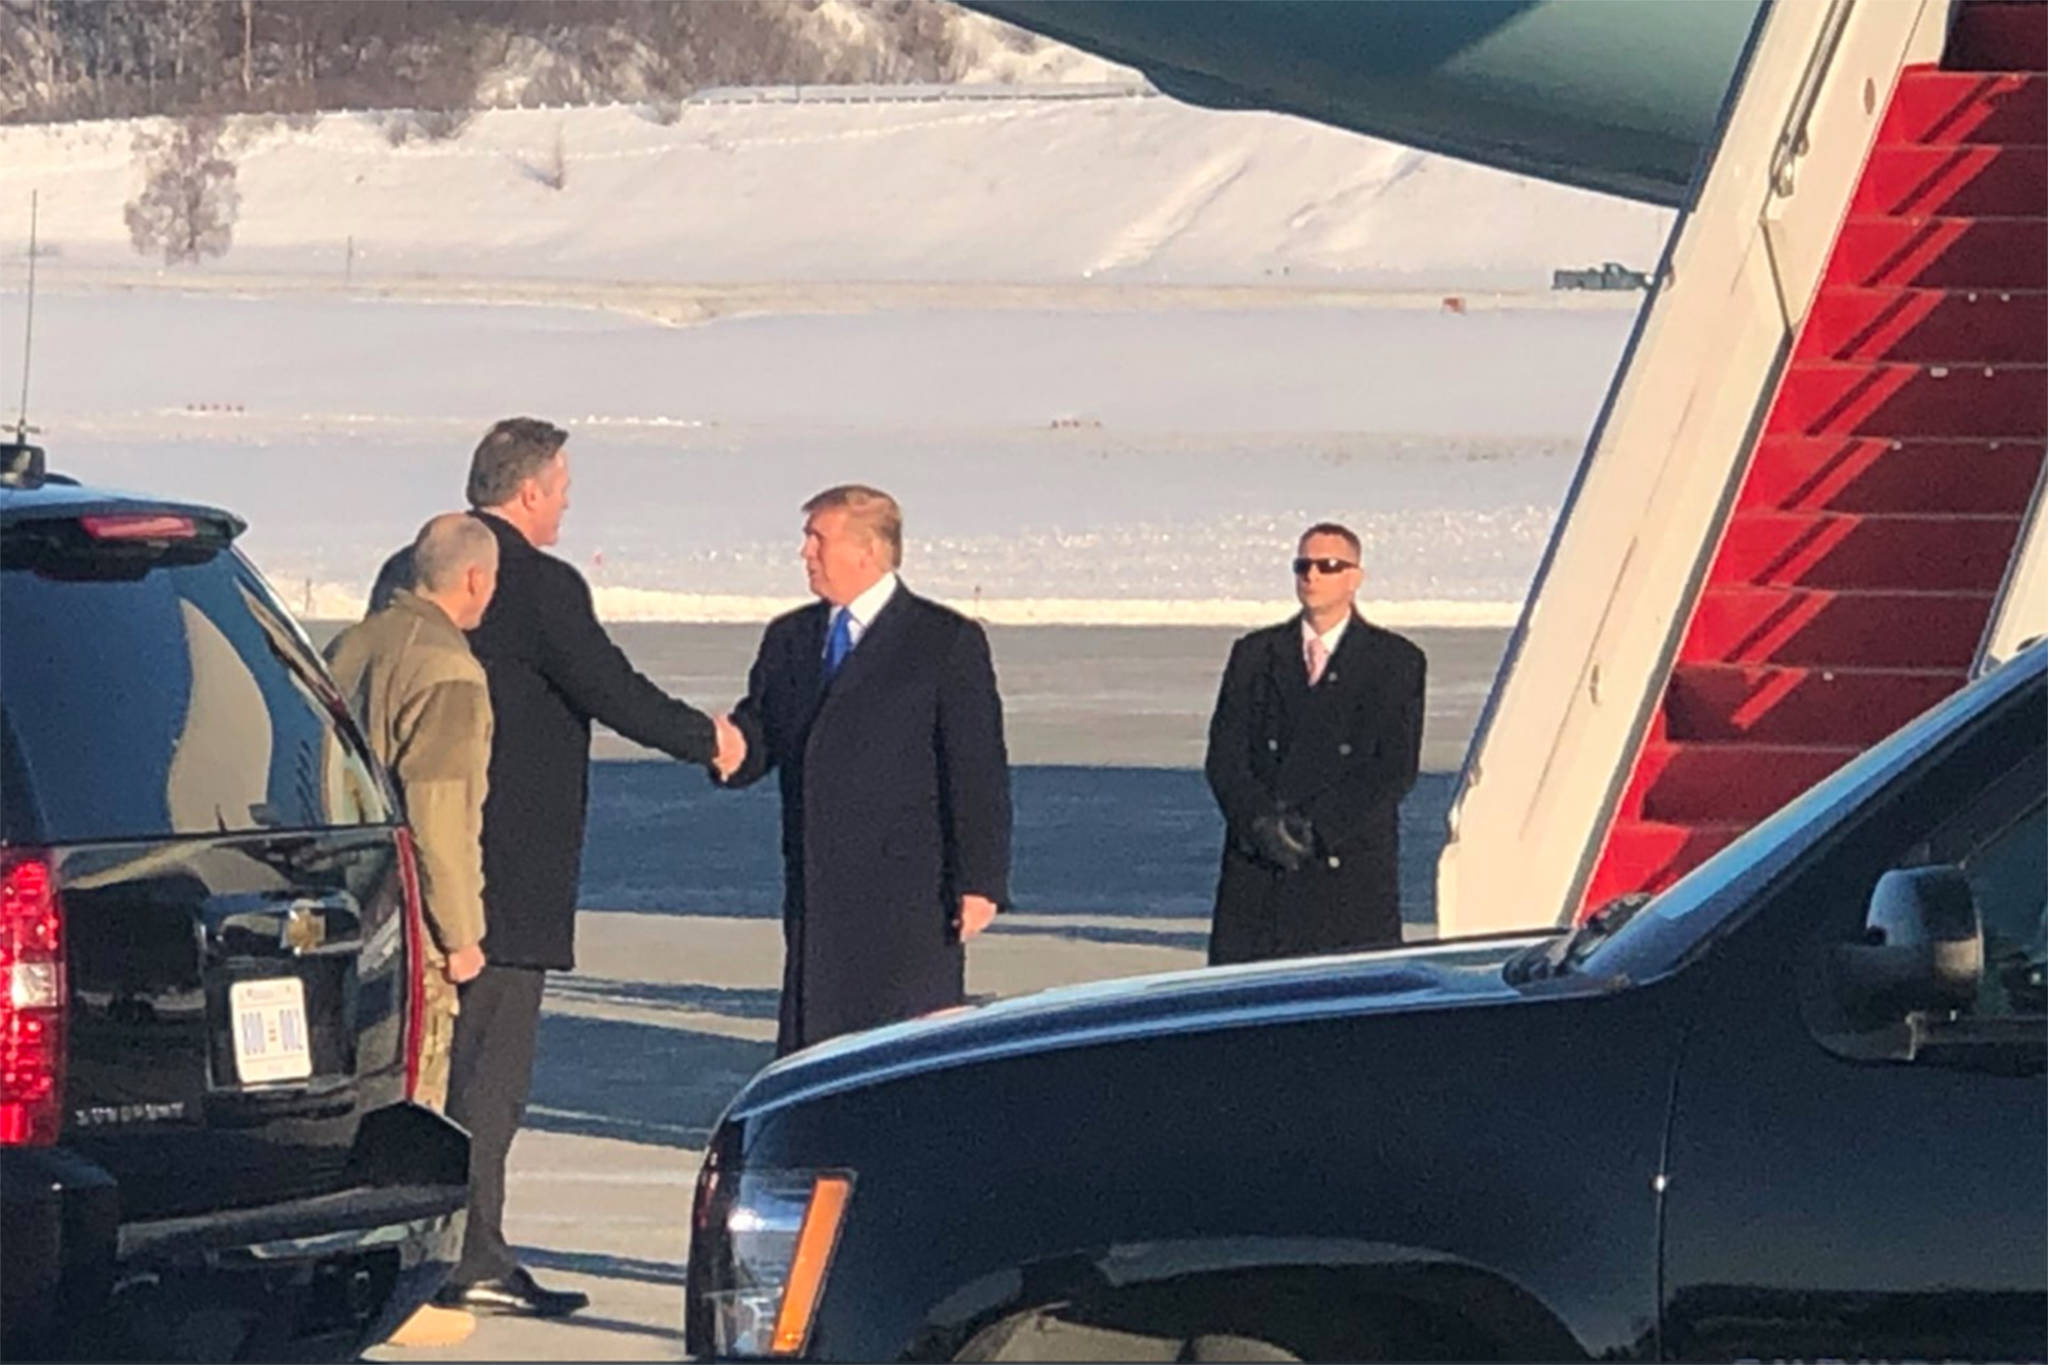 Gov. Mike Dunleavy meets with President Donald Trump in Anchorage on Feb. 28, 2019. (Courtesy photo)